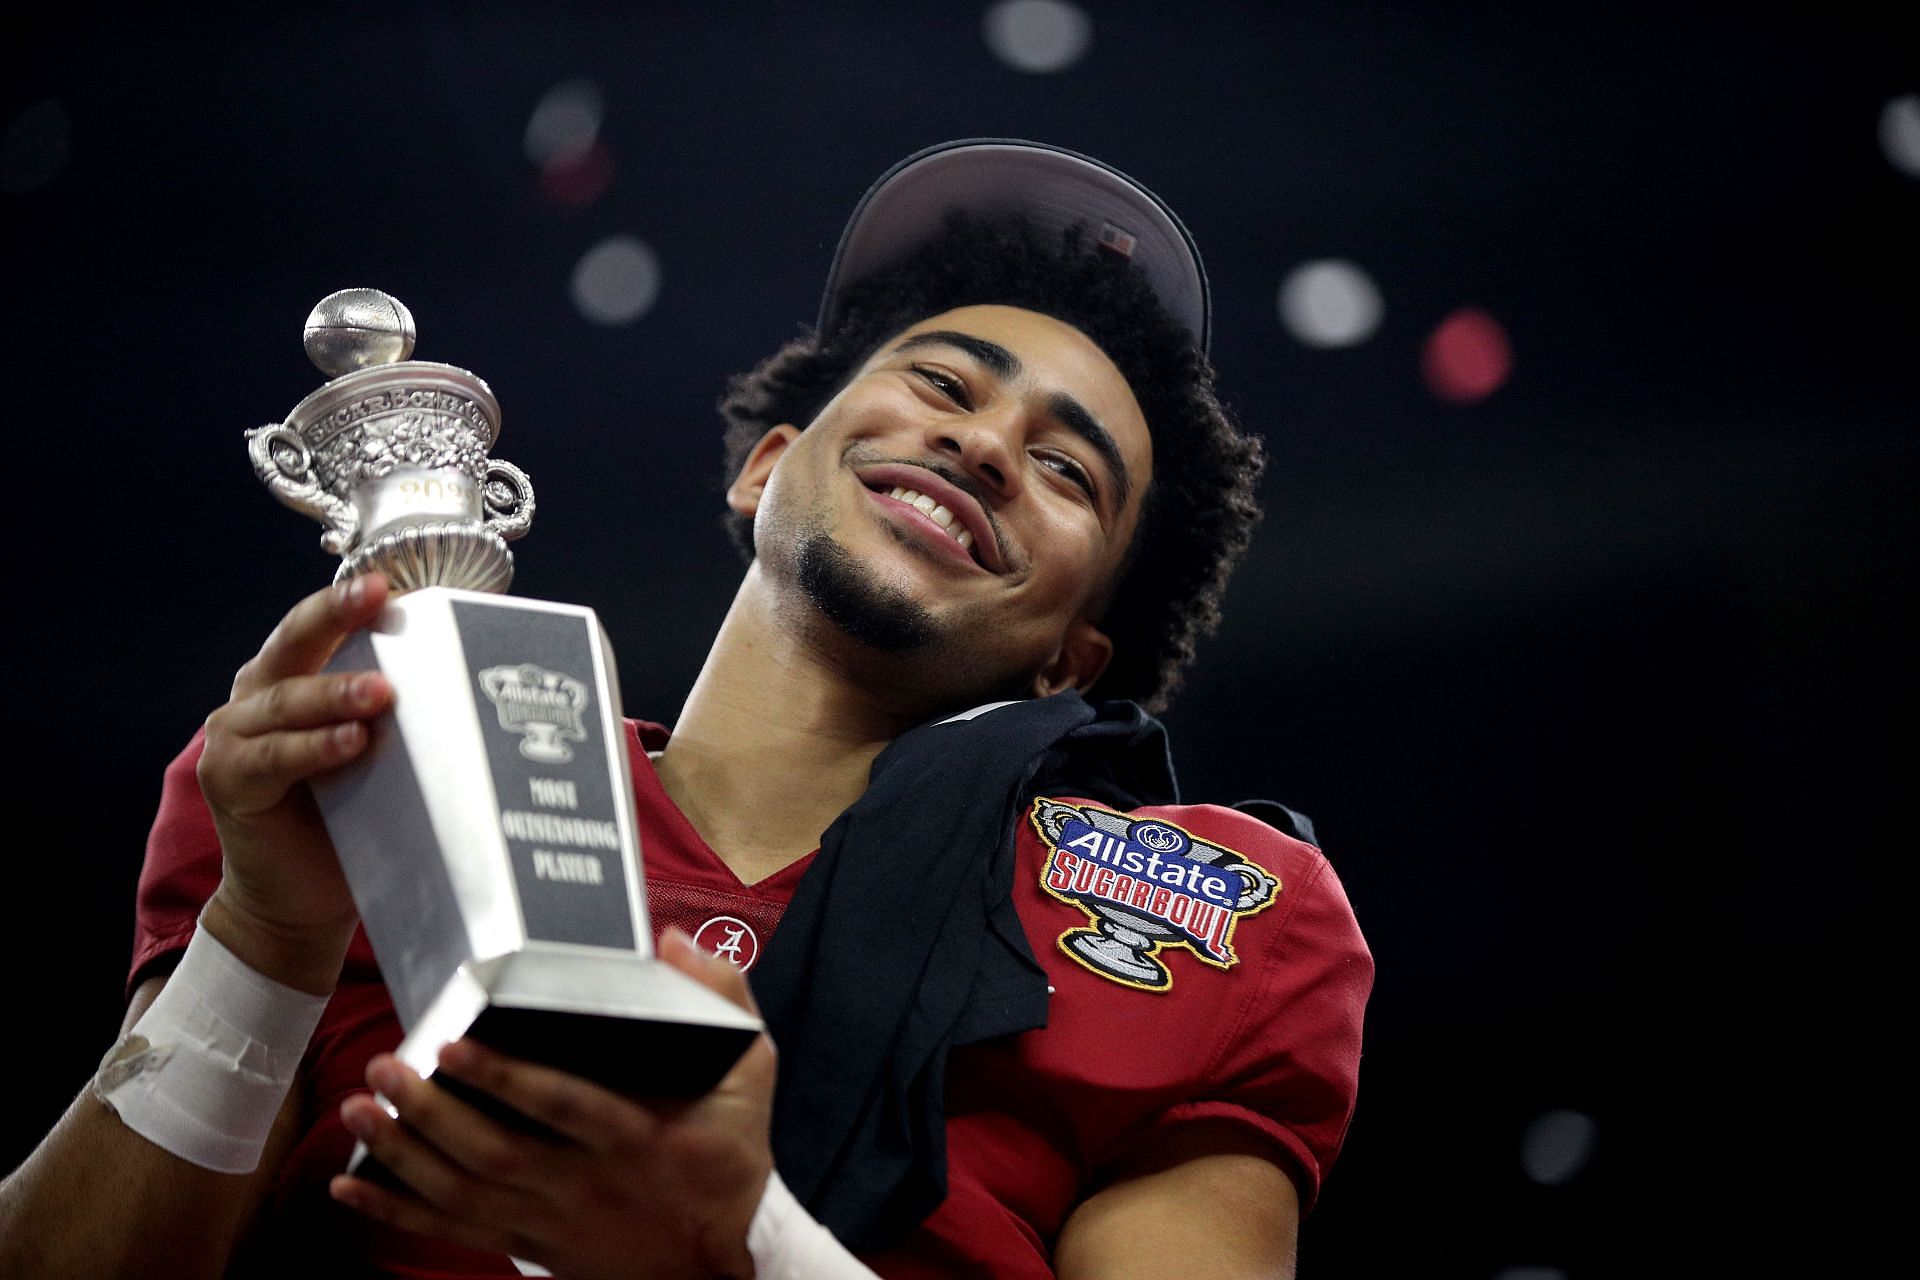 Bryce Young of the Alabama Crimson Tide after recieving the MVP award during the Allstate Sugar Bowl